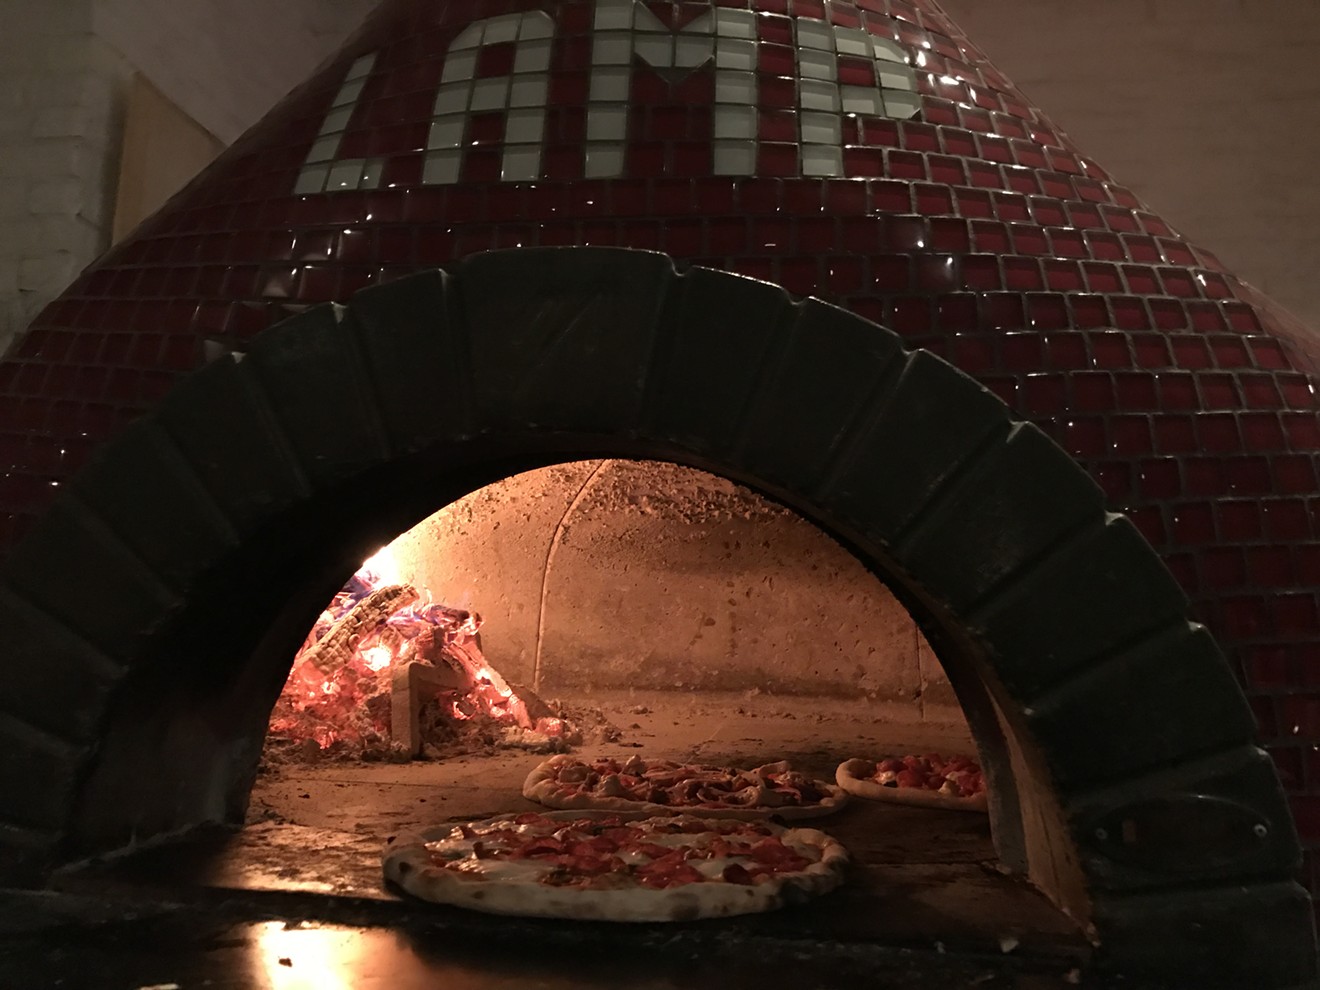 The LAMP red brick oven is like a lighthouse in the restaurant.